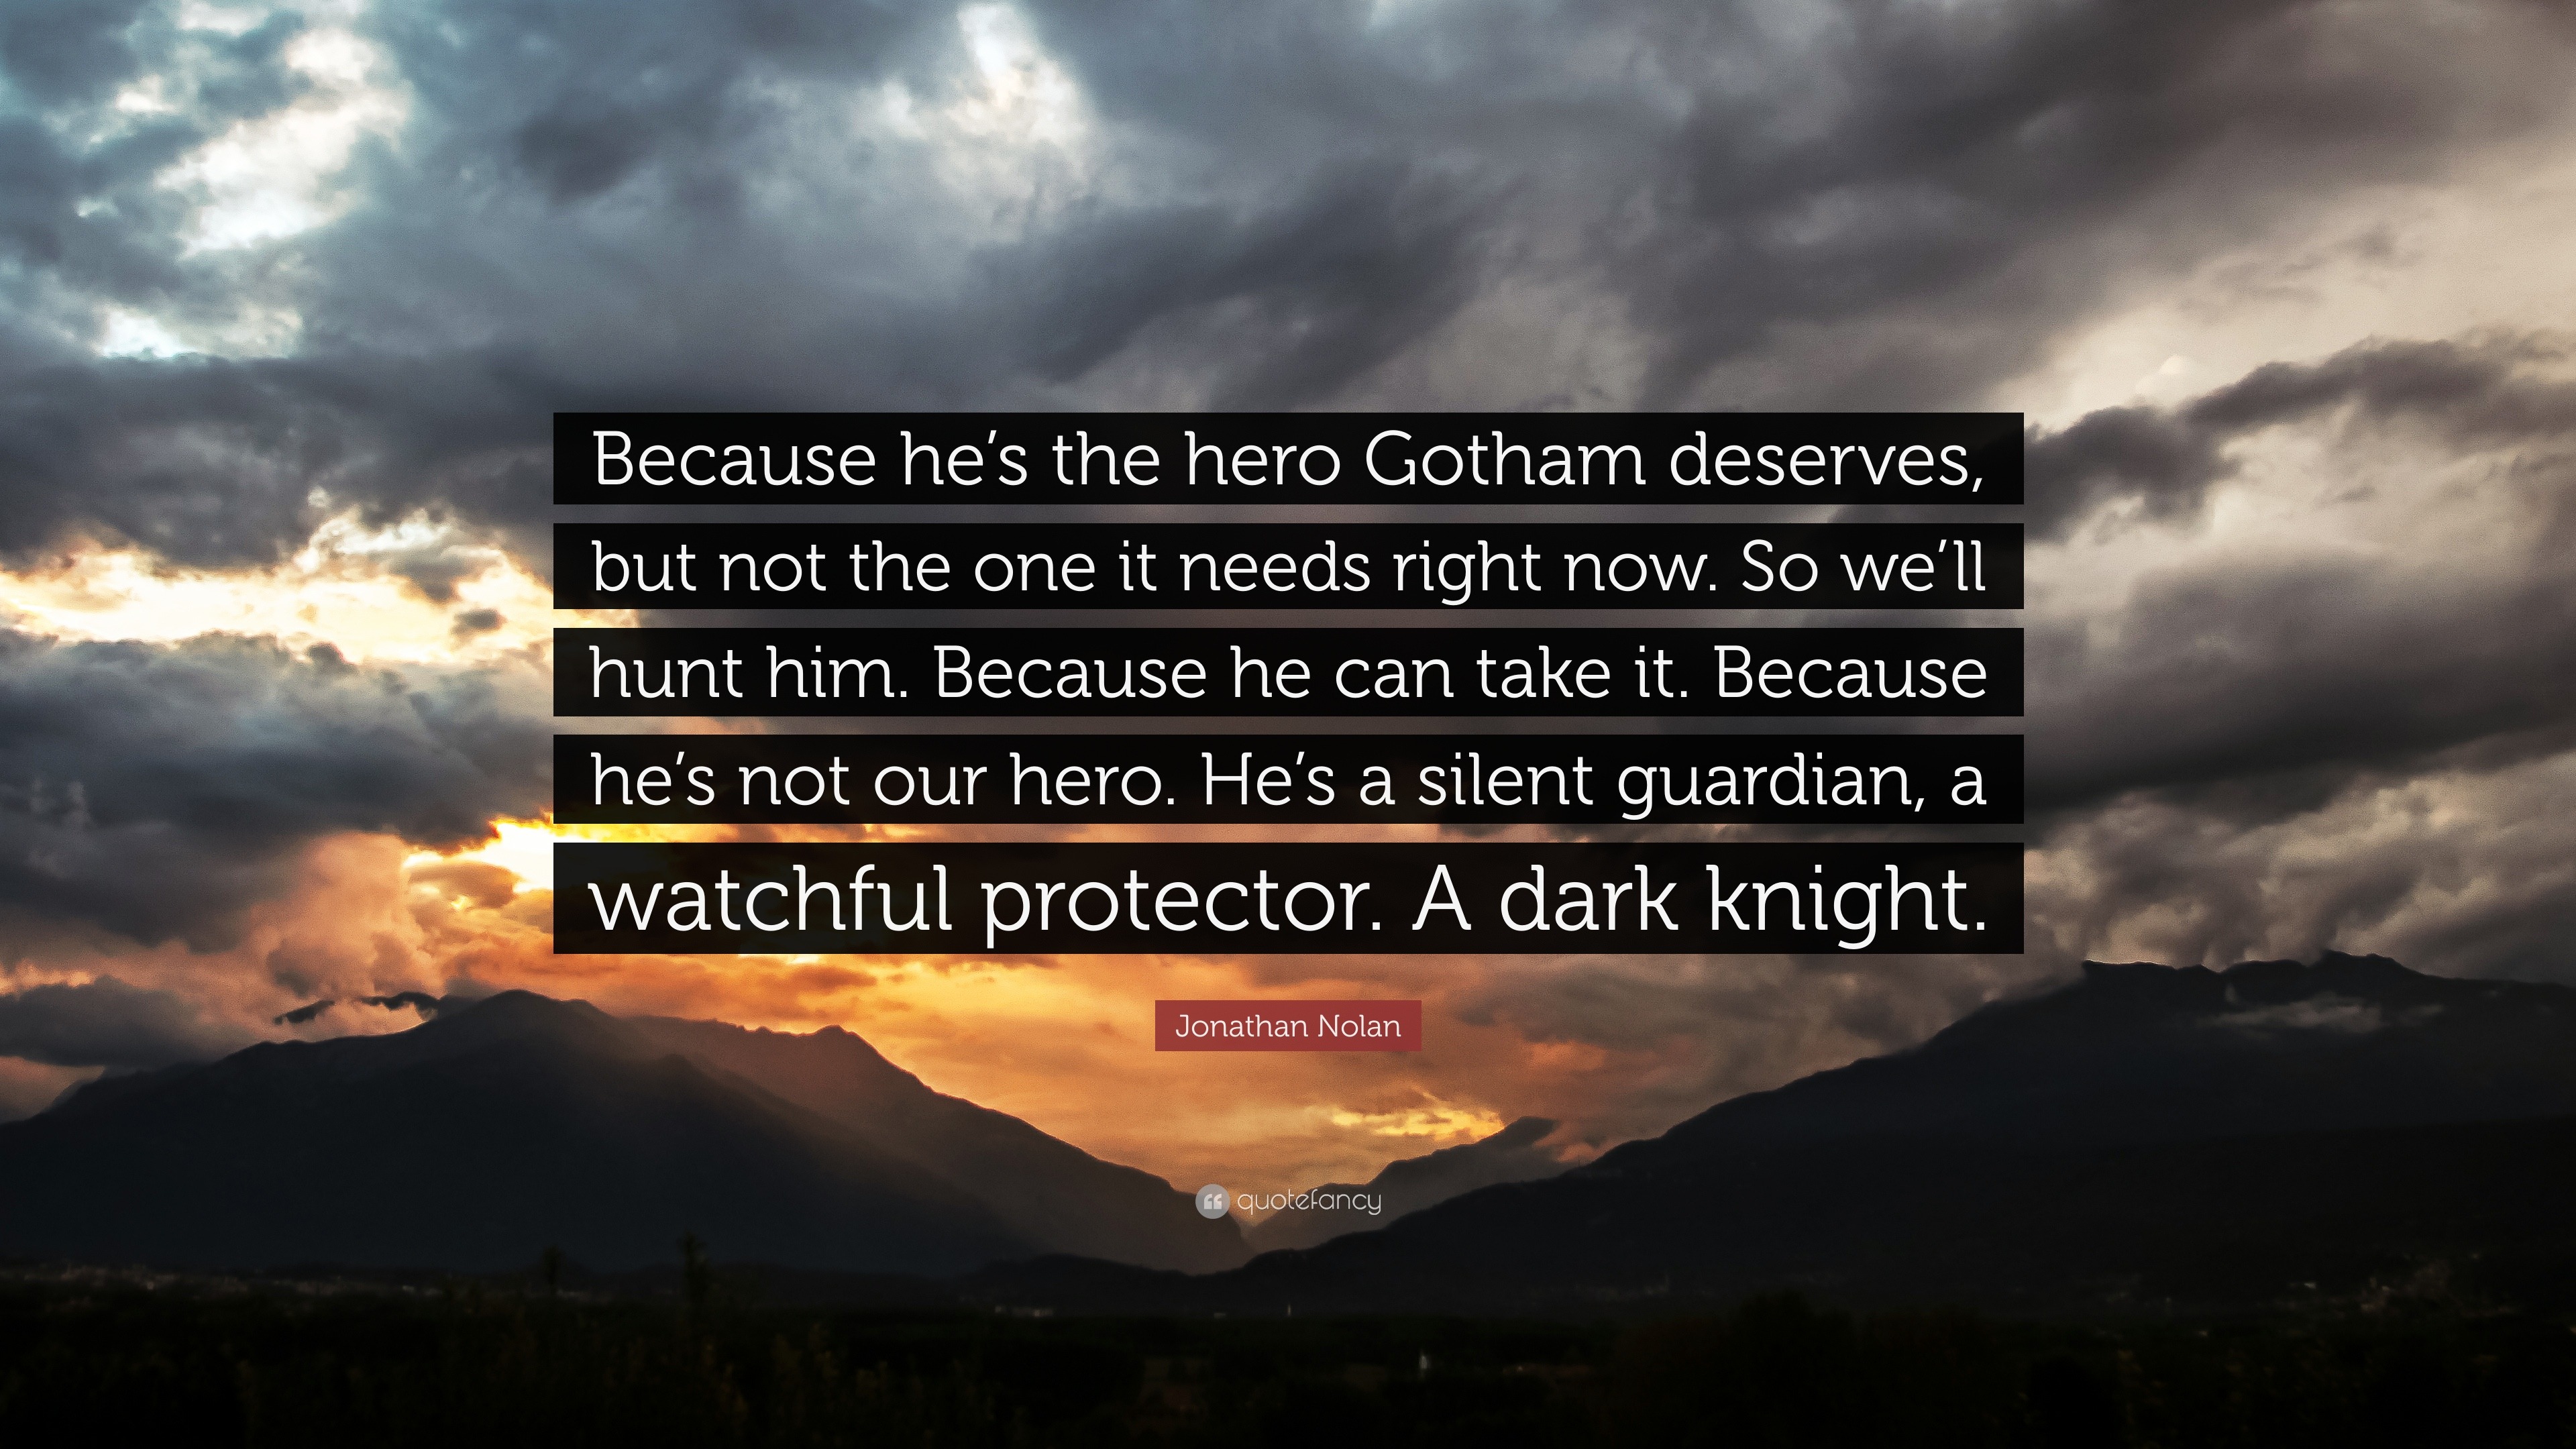 jonathan nolan quote u201cbecause he s the hero gotham deserves but rh quotefancy Great Quotes From the Dark Knight Dark Knight Rises Bane Quotes